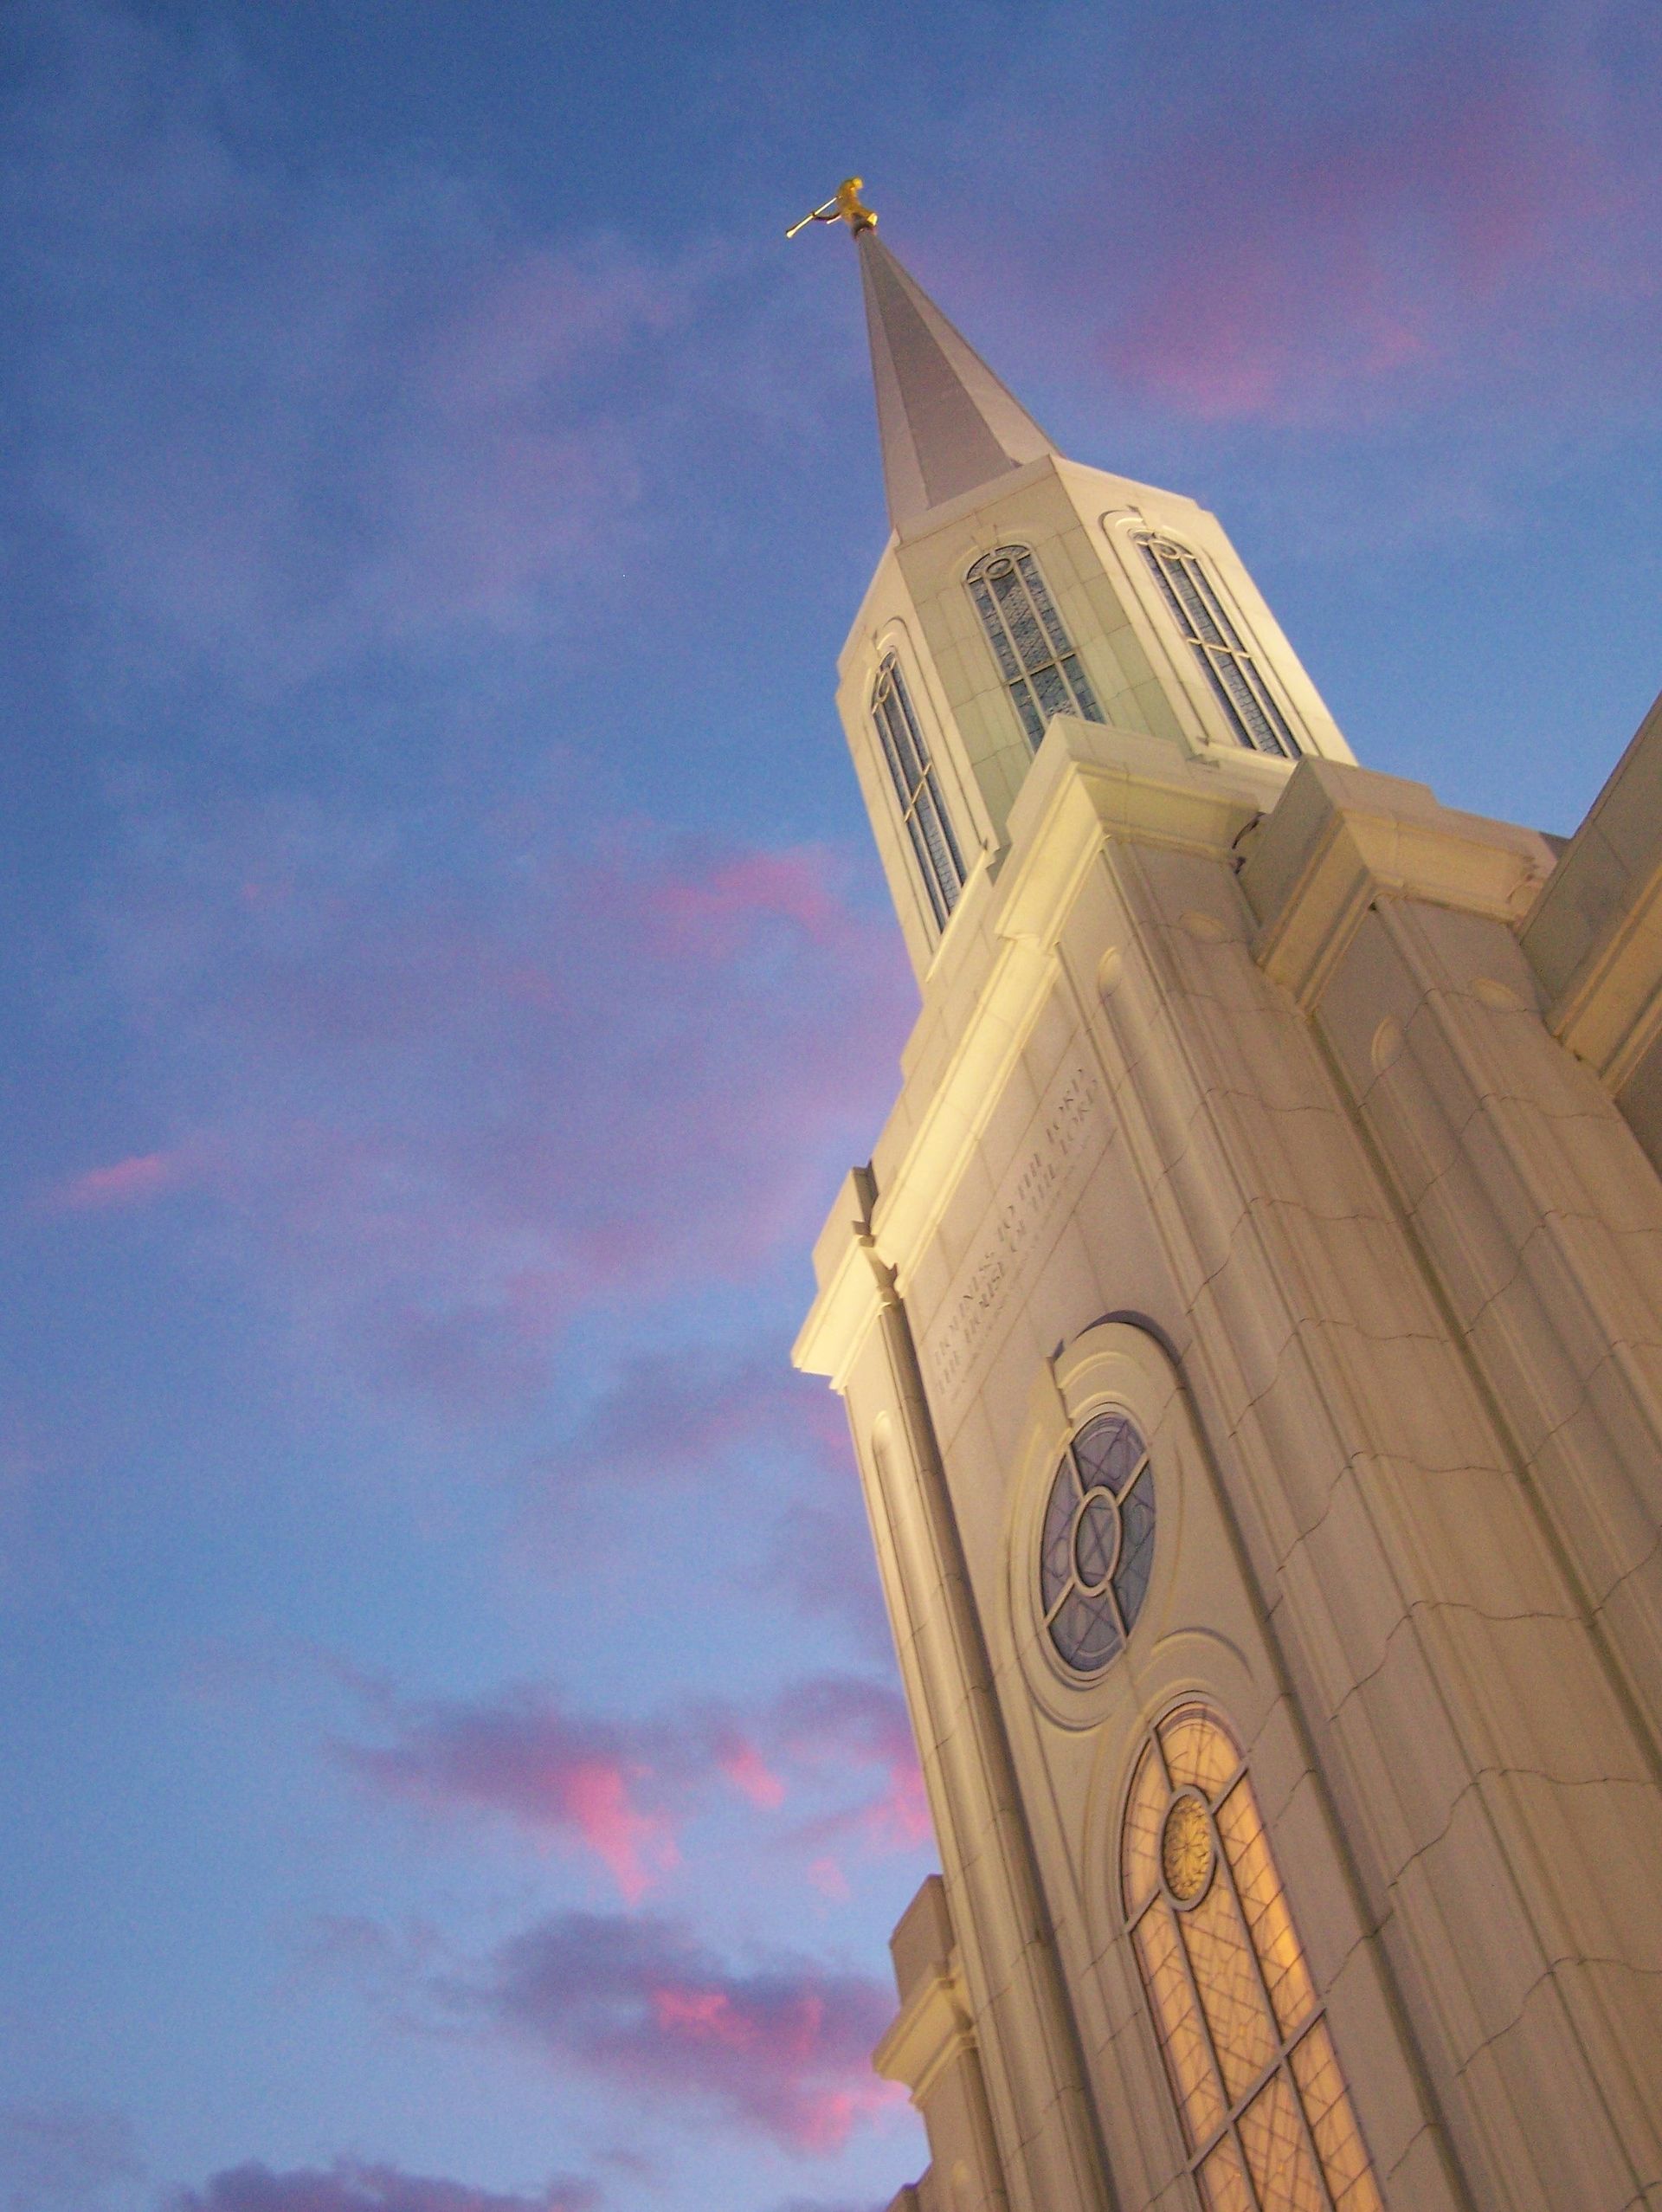 The St. Louis Missouri Temple in the evening, including the windows and spire.